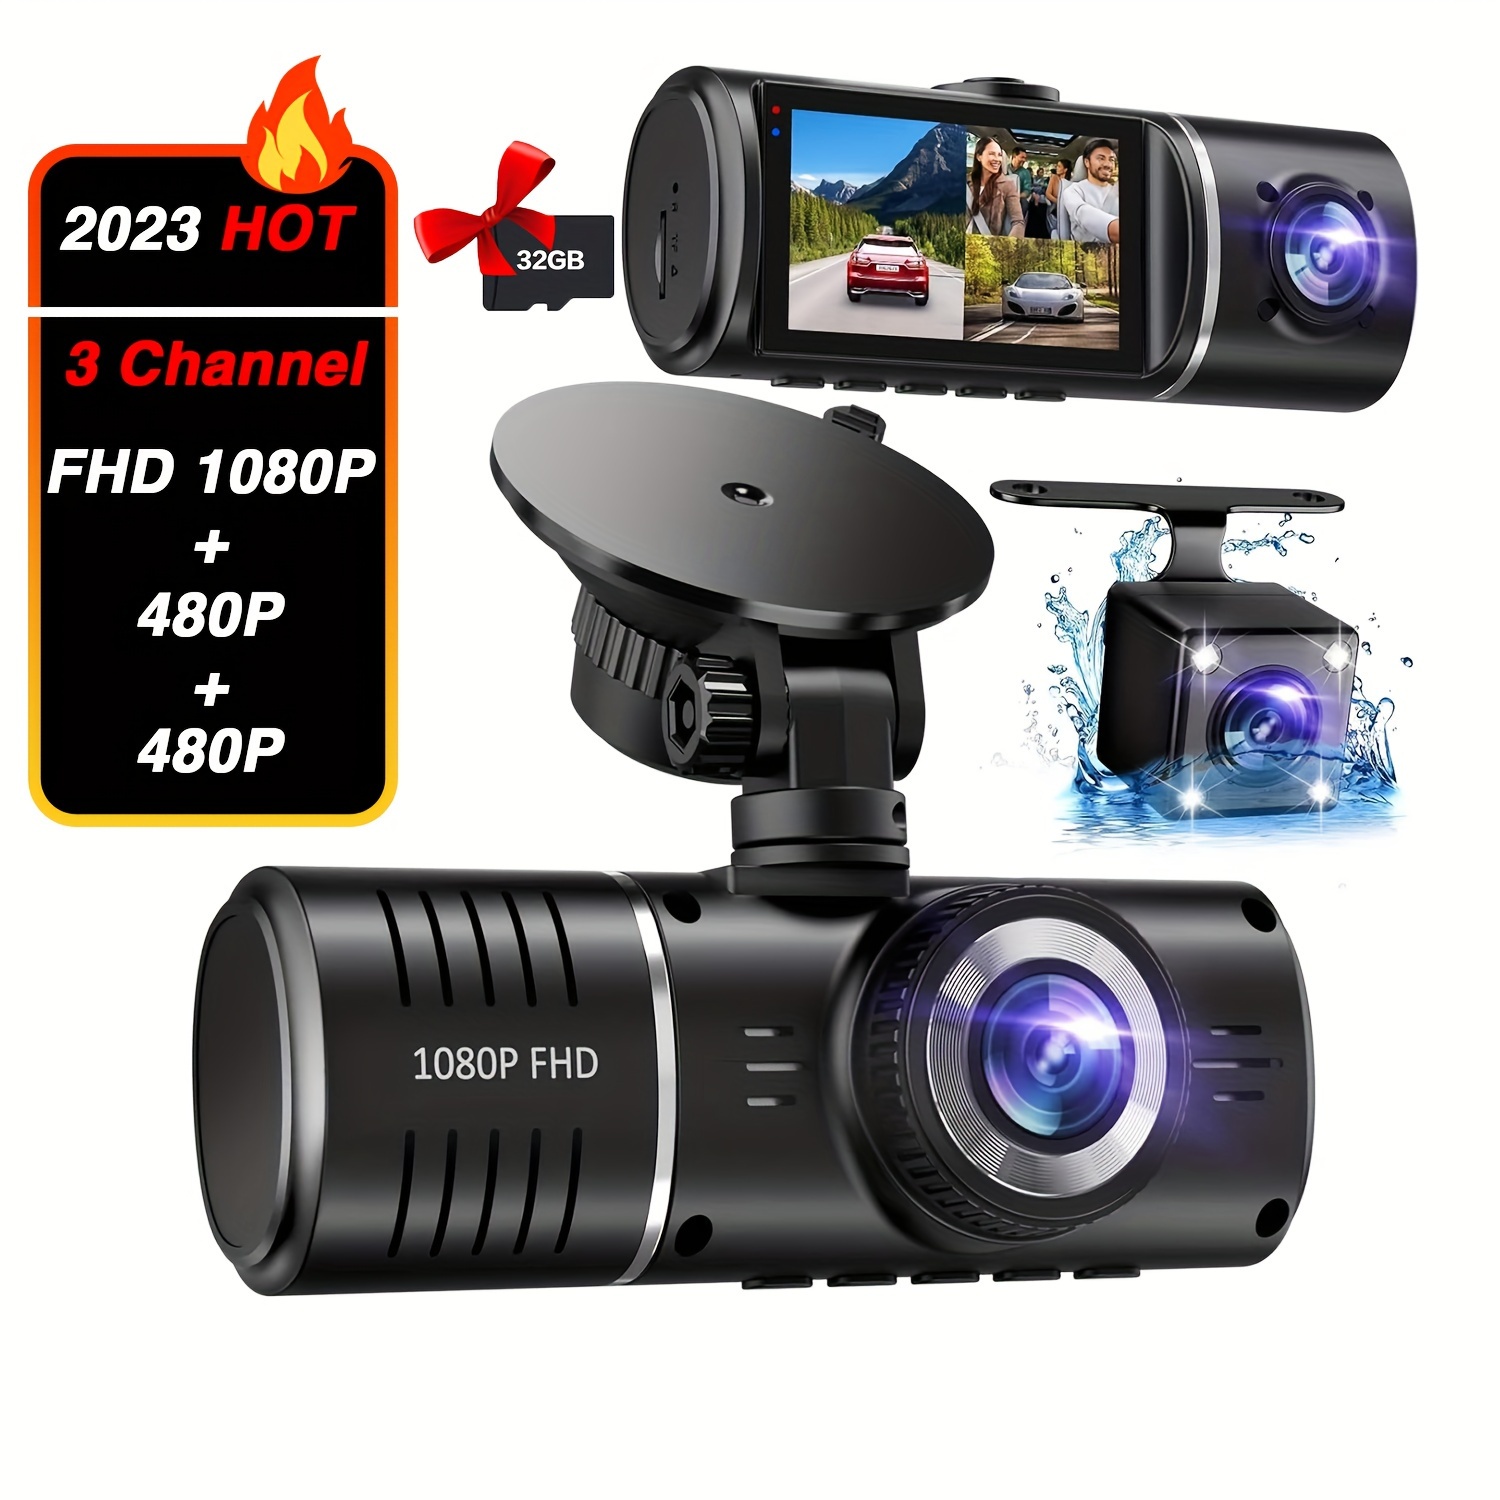 TOGUARD Dual Dash Cam Front and Inside 1080P Dash Camera for Cars